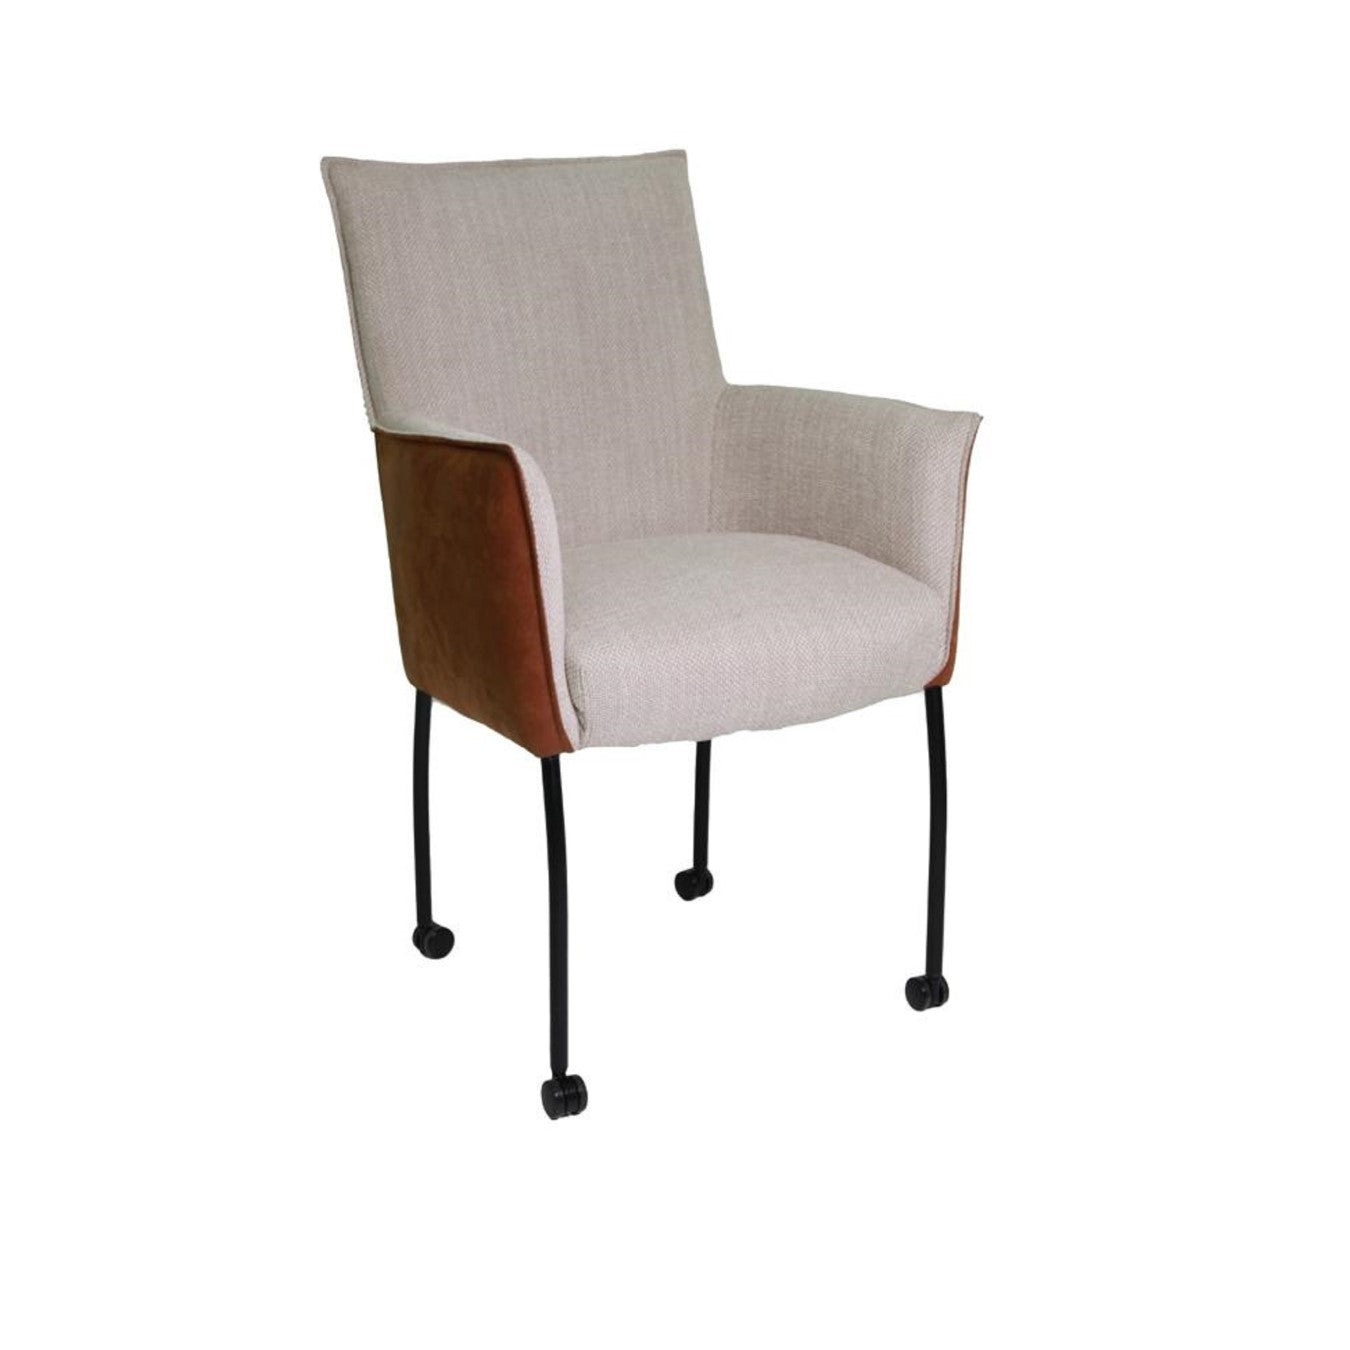 Ergonomic chair with leather and fabric wheels ✔ SPRING ROLLS model